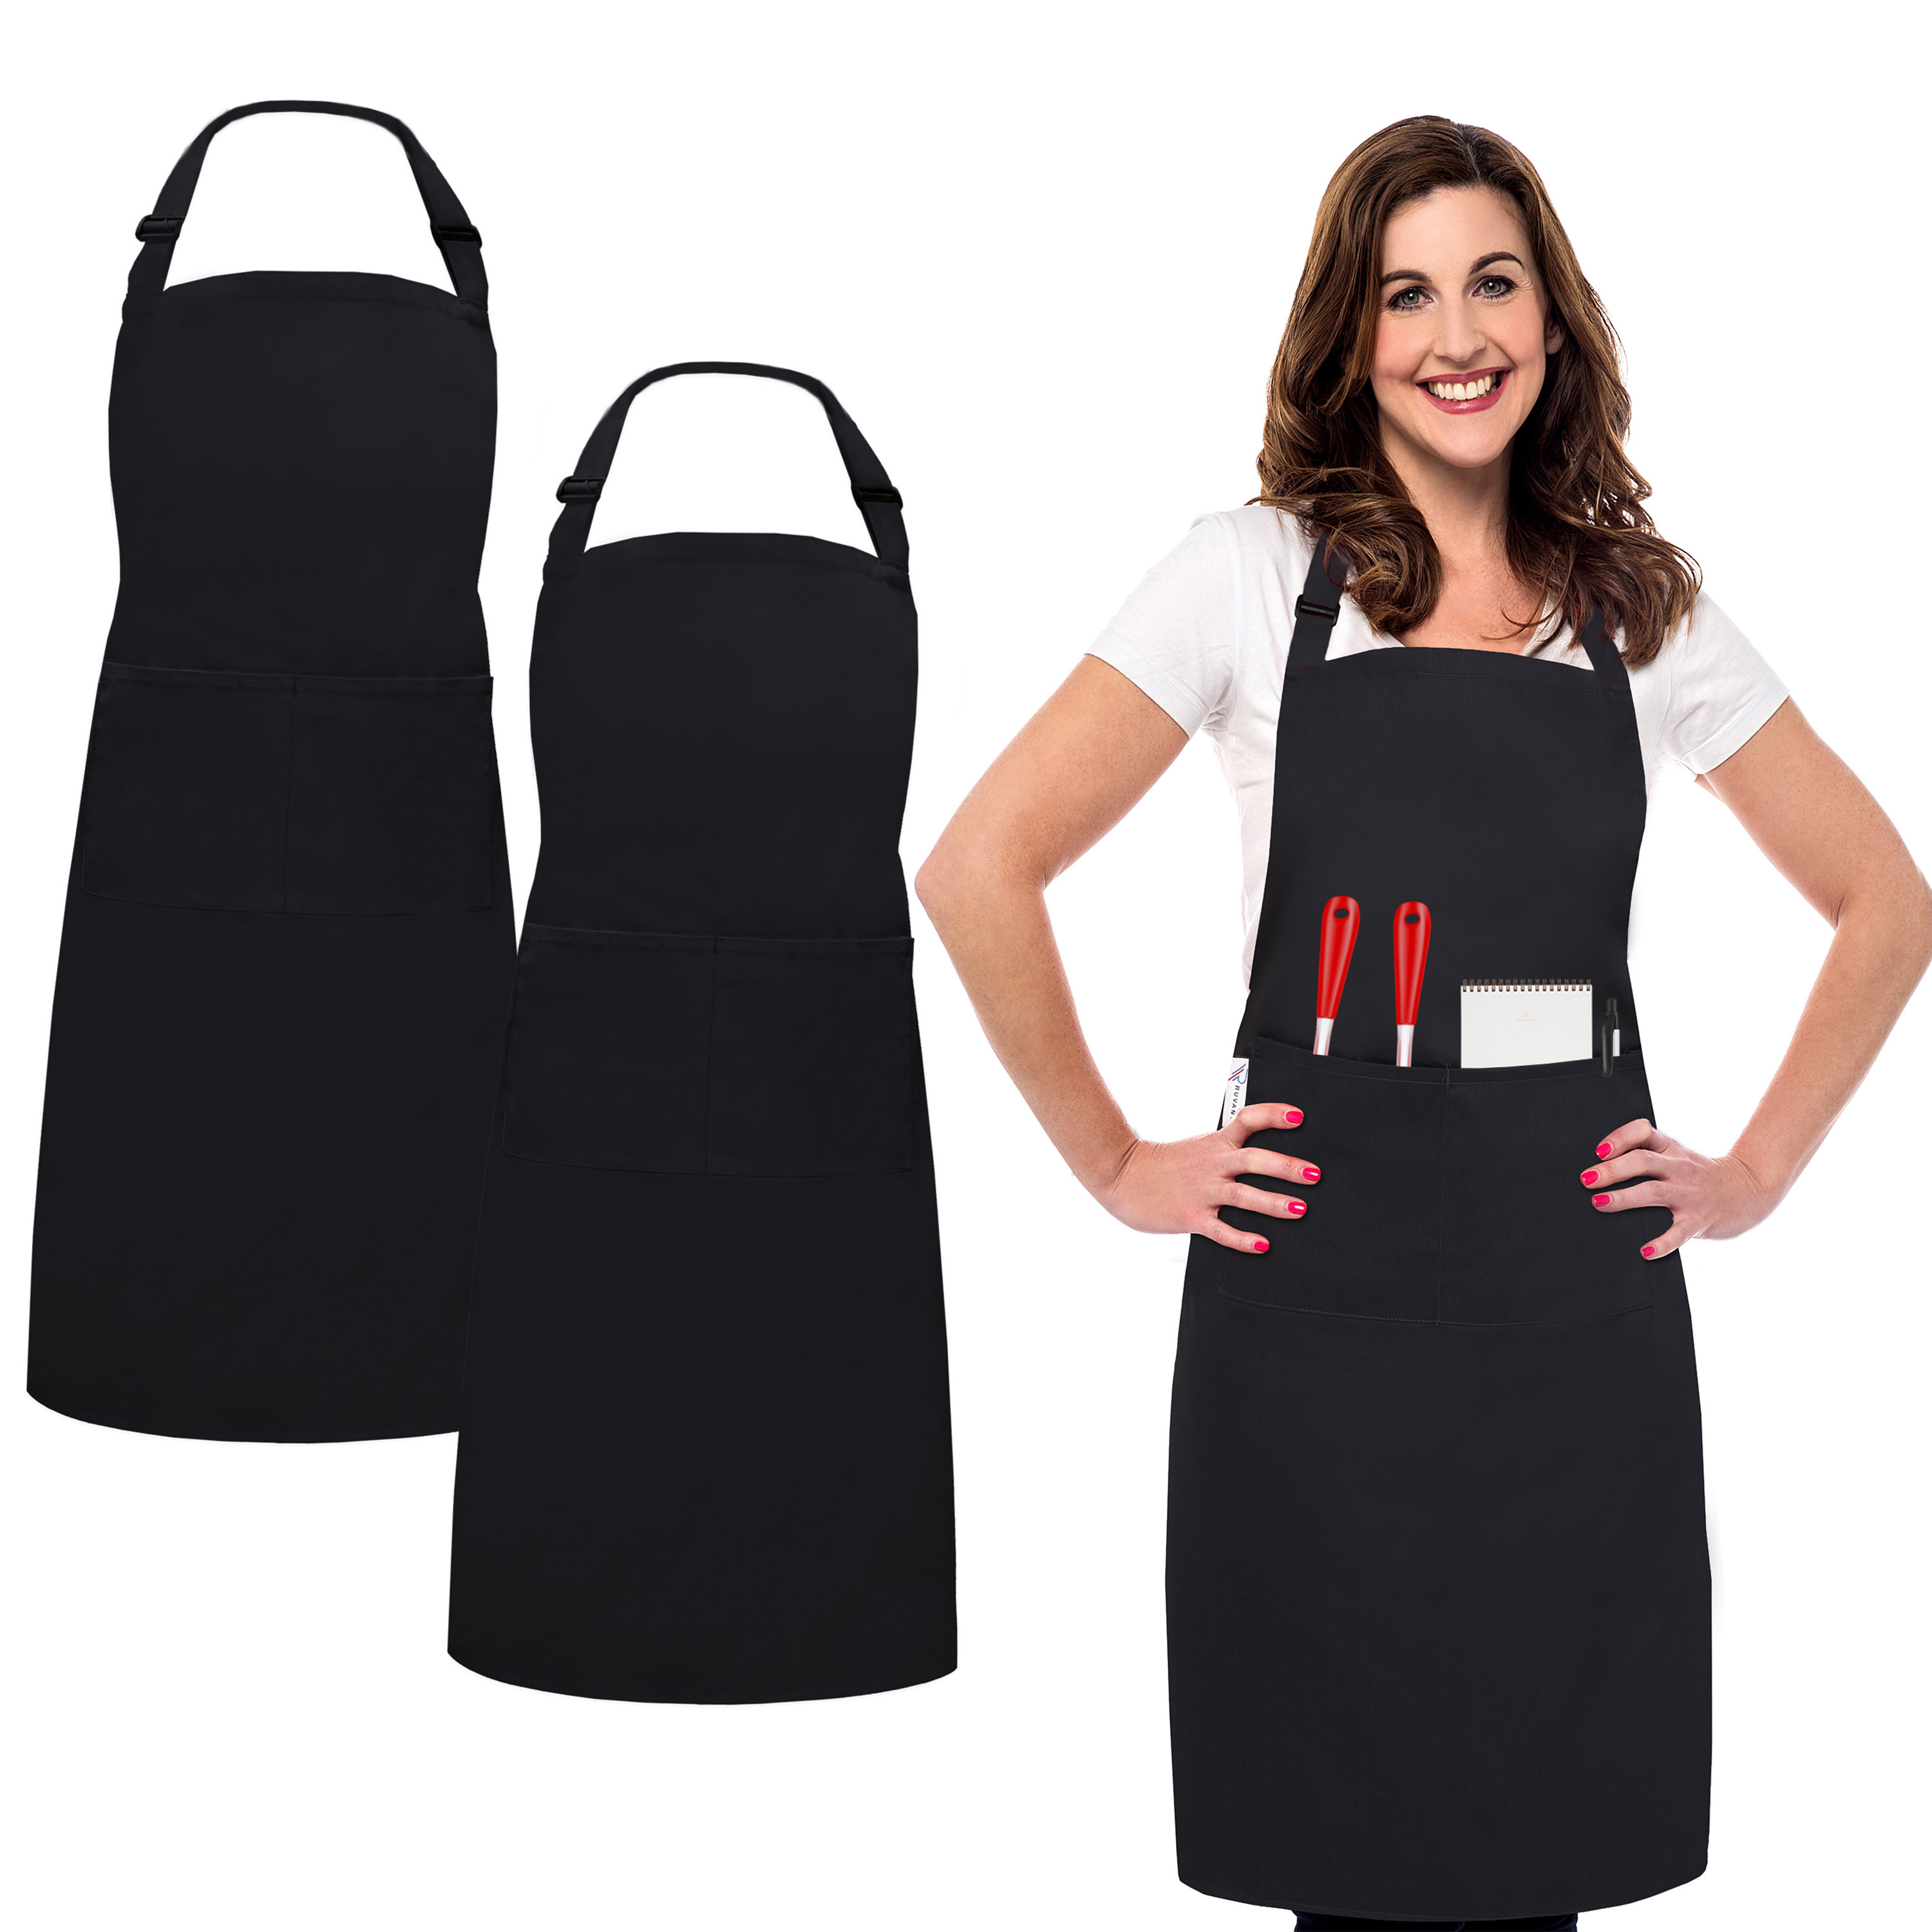 Buy White Disposable Aprons 28 x 36 Durable PP 55 gsm